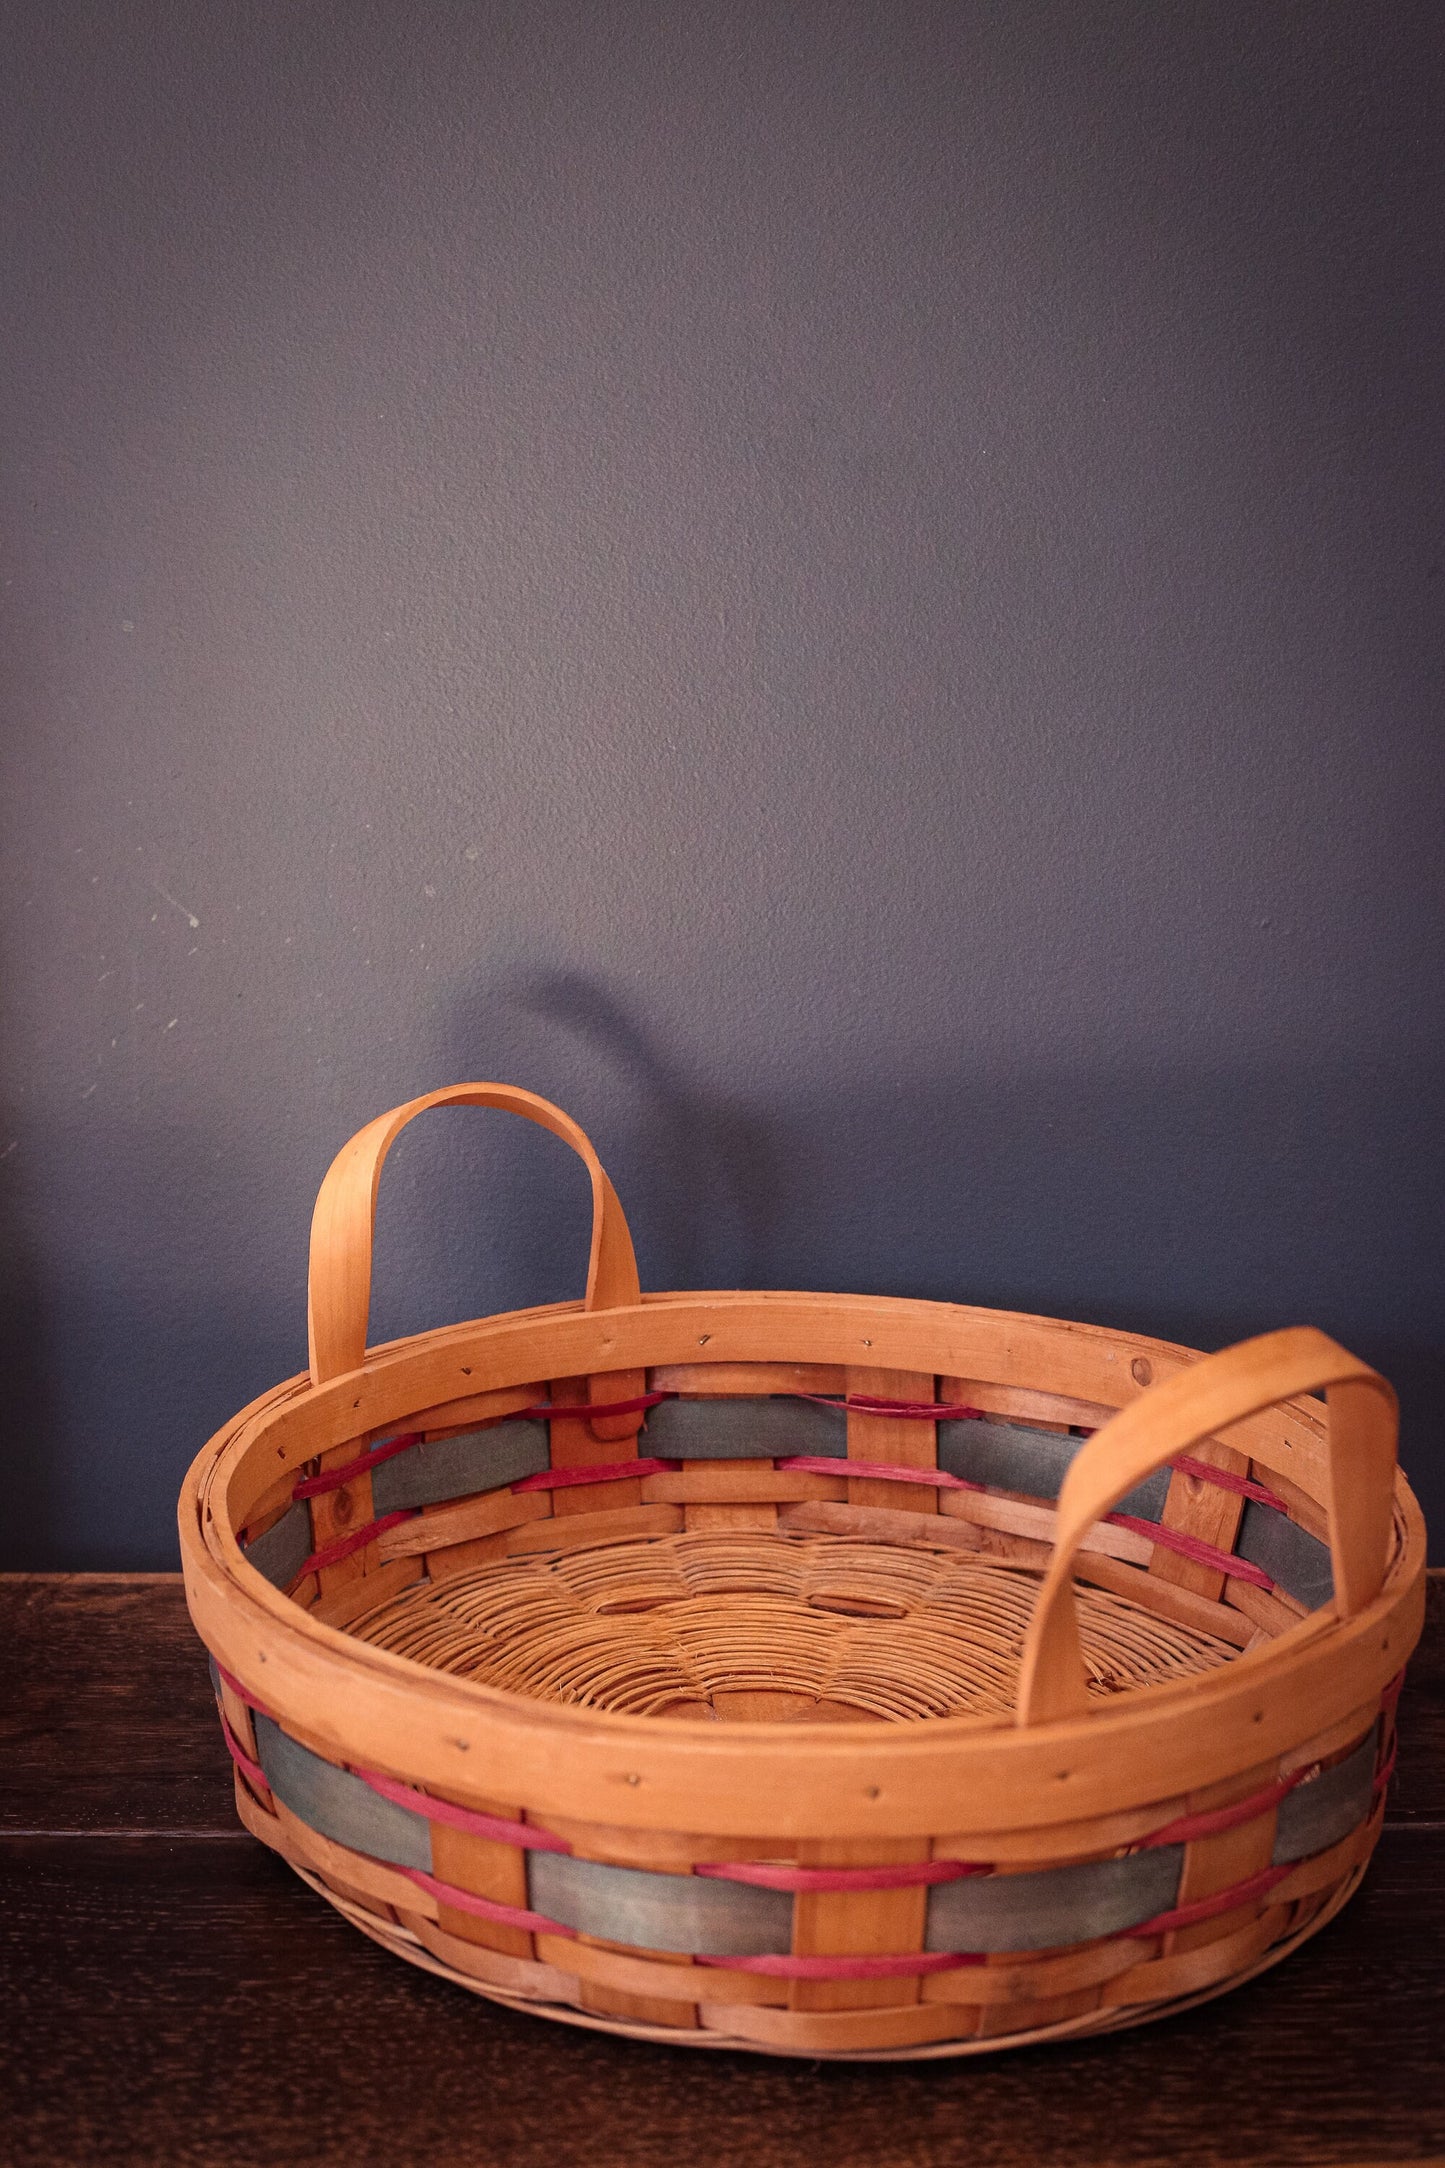 Round Flat Bottom Red/Blue Accent Dyed Splint Basket with Wood Handles - Vintage Farmhouse Console/Coffee Table Basket Decor